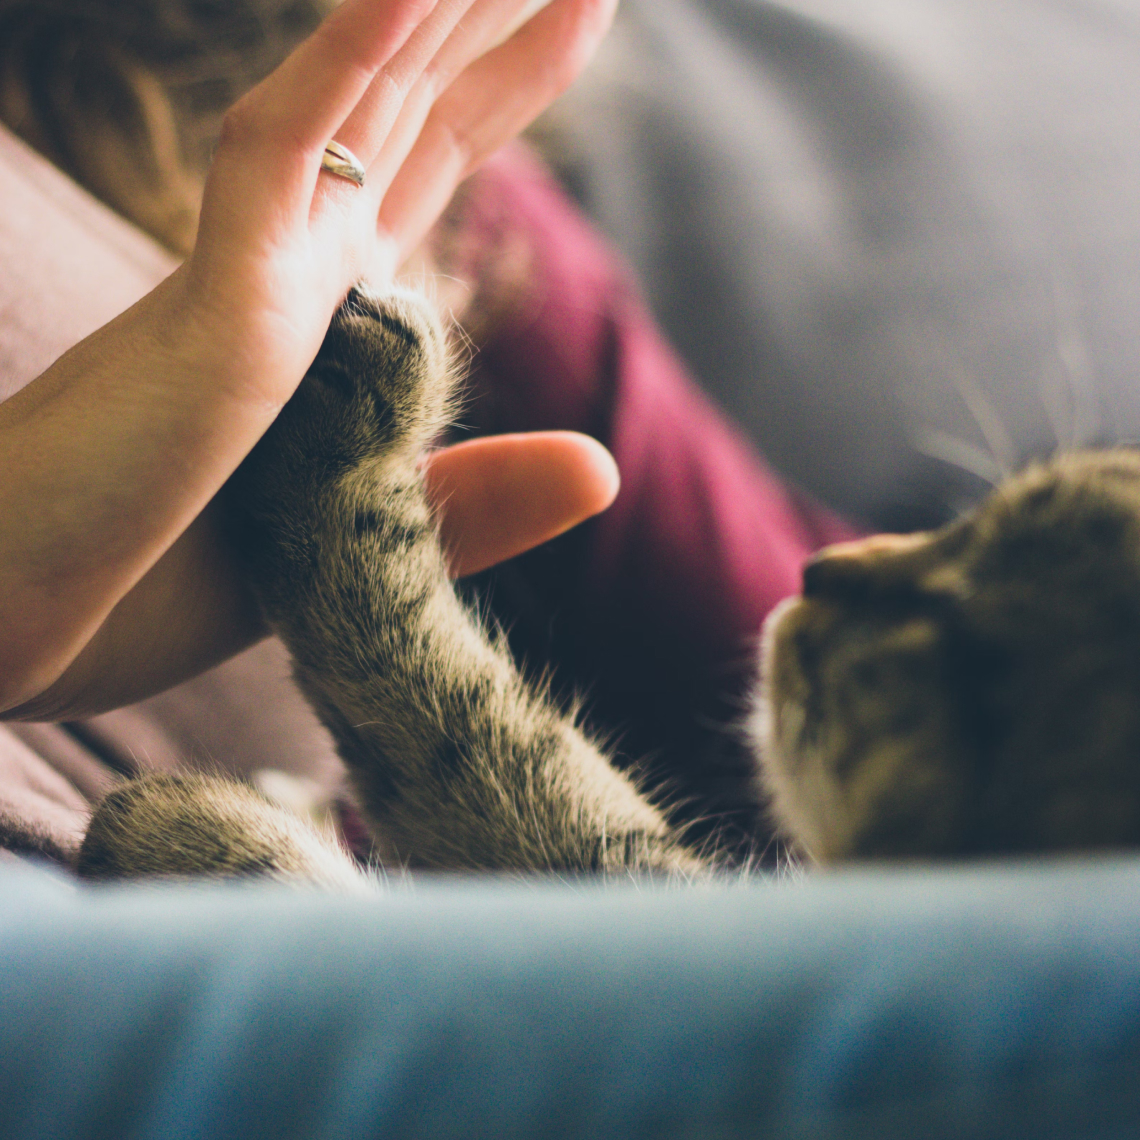 Photo of a hand high-fiving a cat paw, by Jonas Vincent, Unsplash